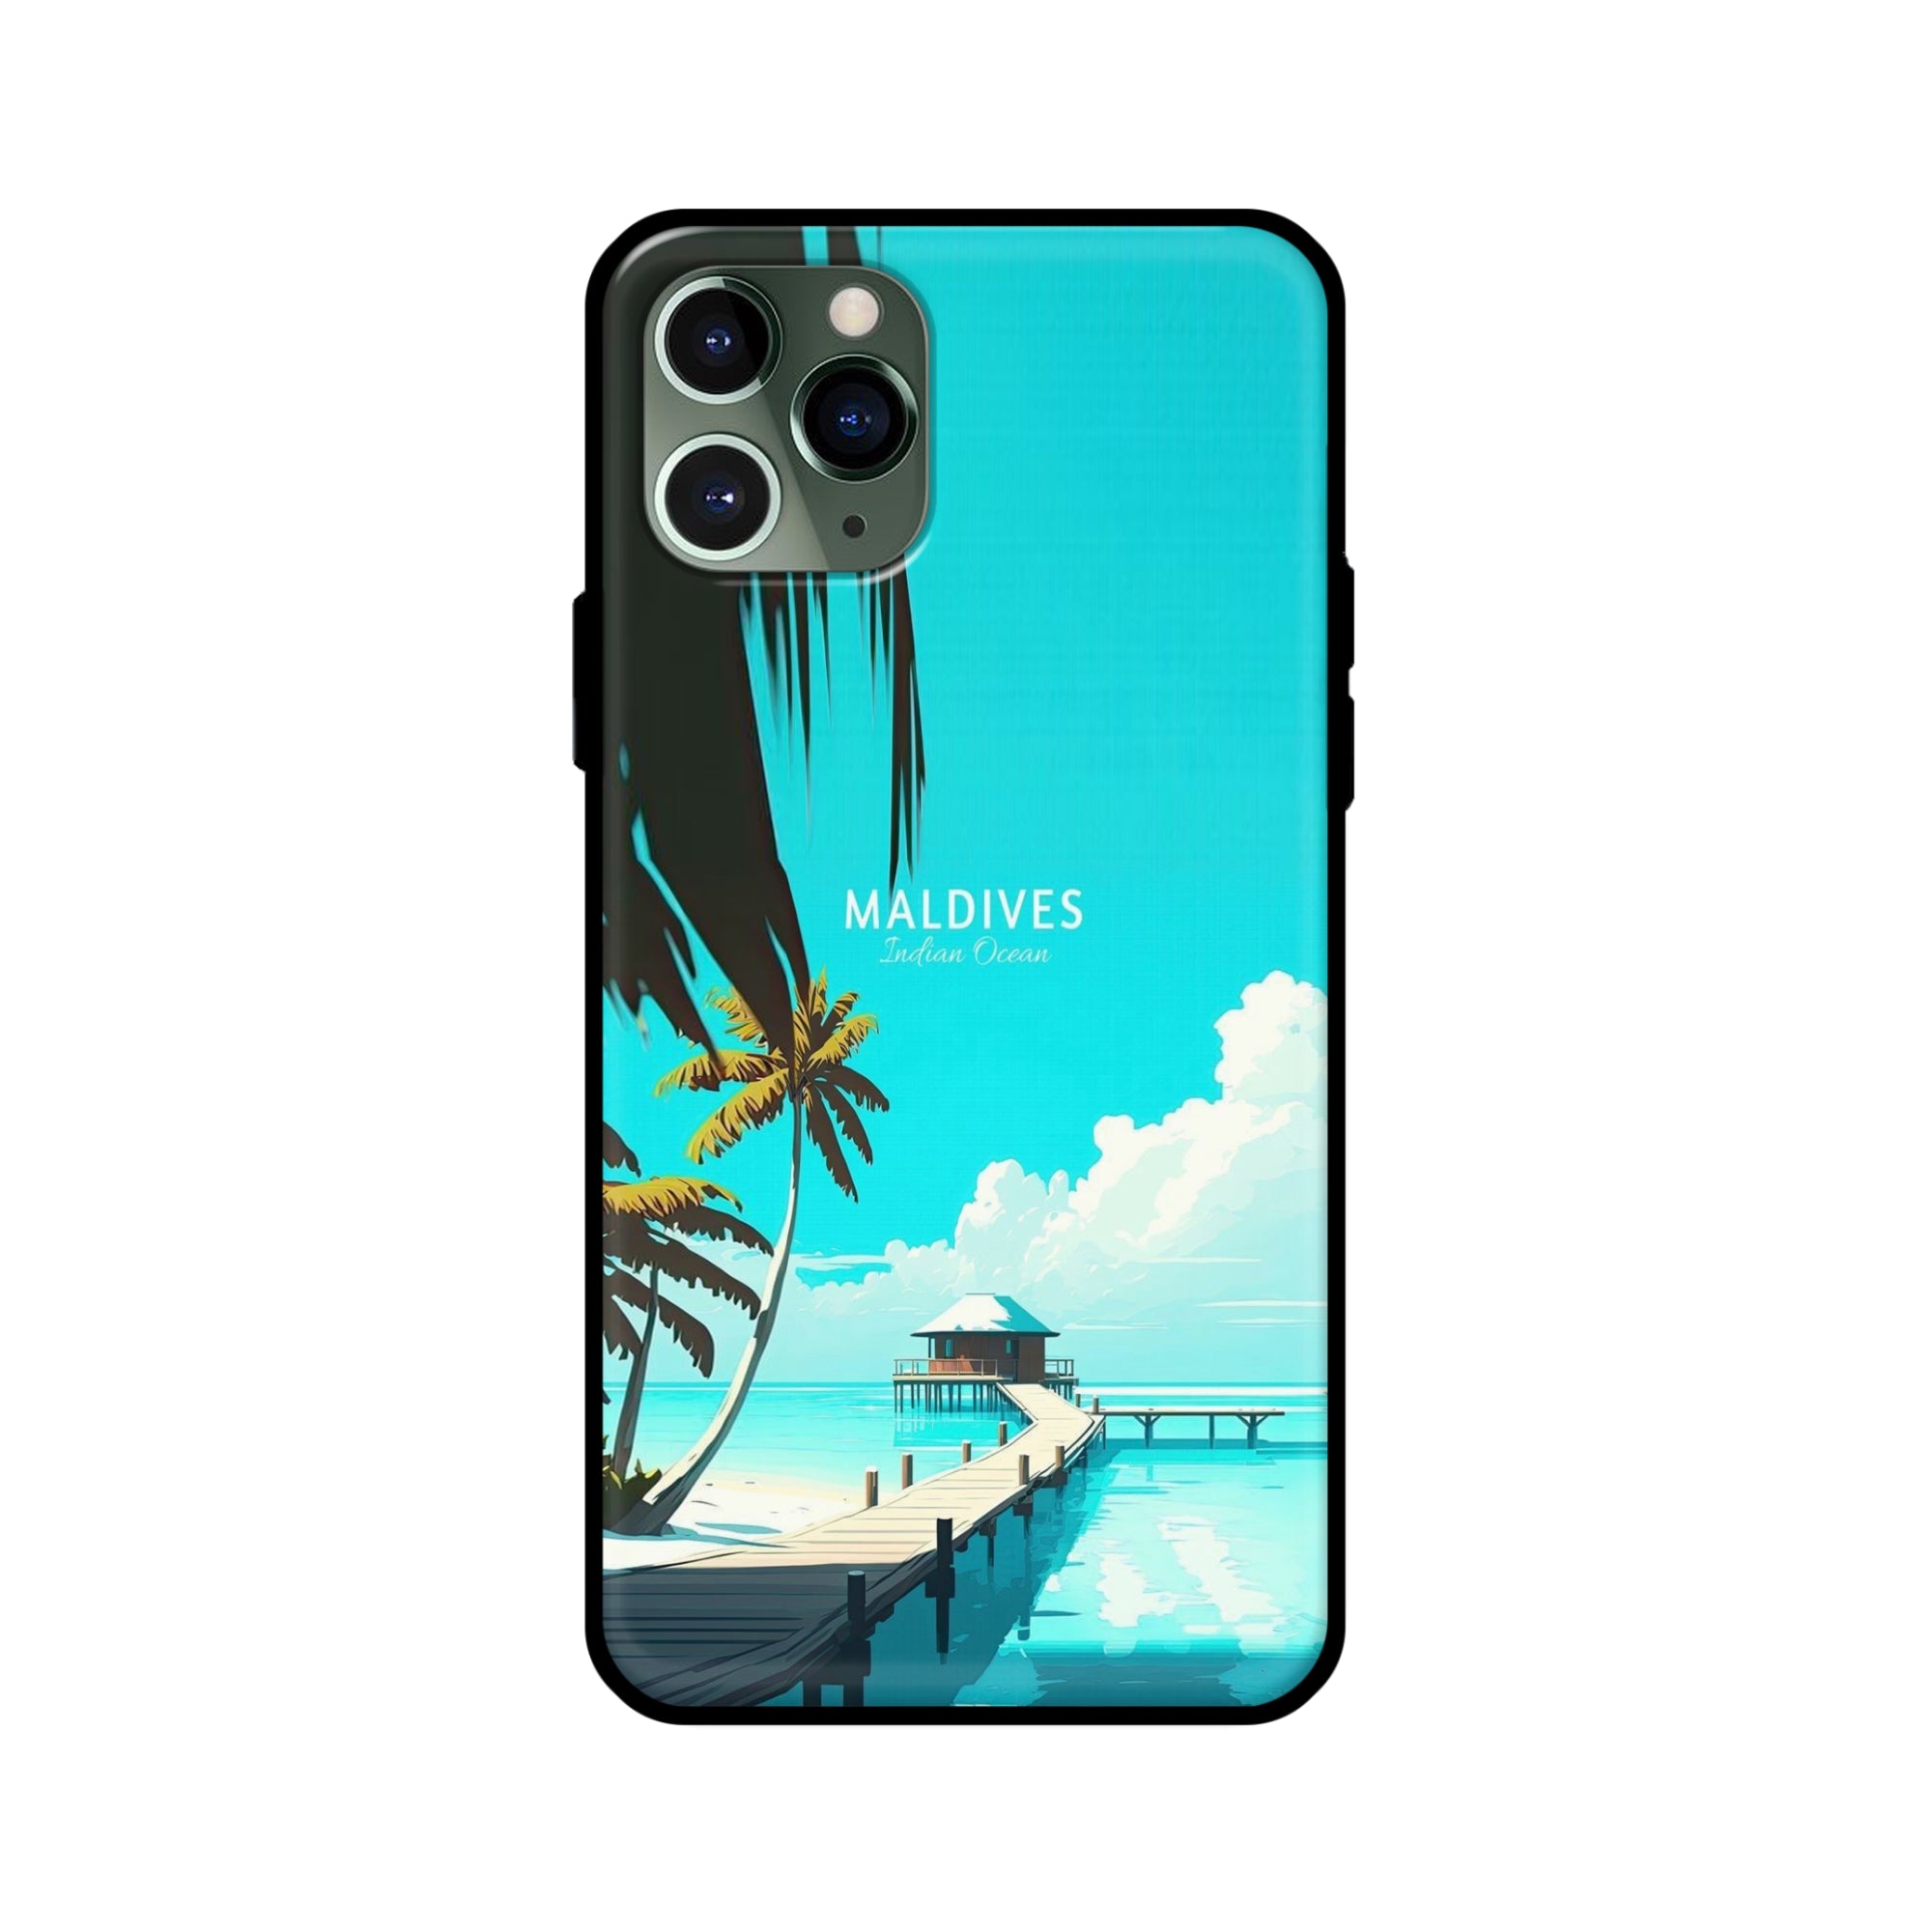 Buy Maldives Glass/Metal Back Mobile Phone Case/Cover For iPhone 11 Pro Online